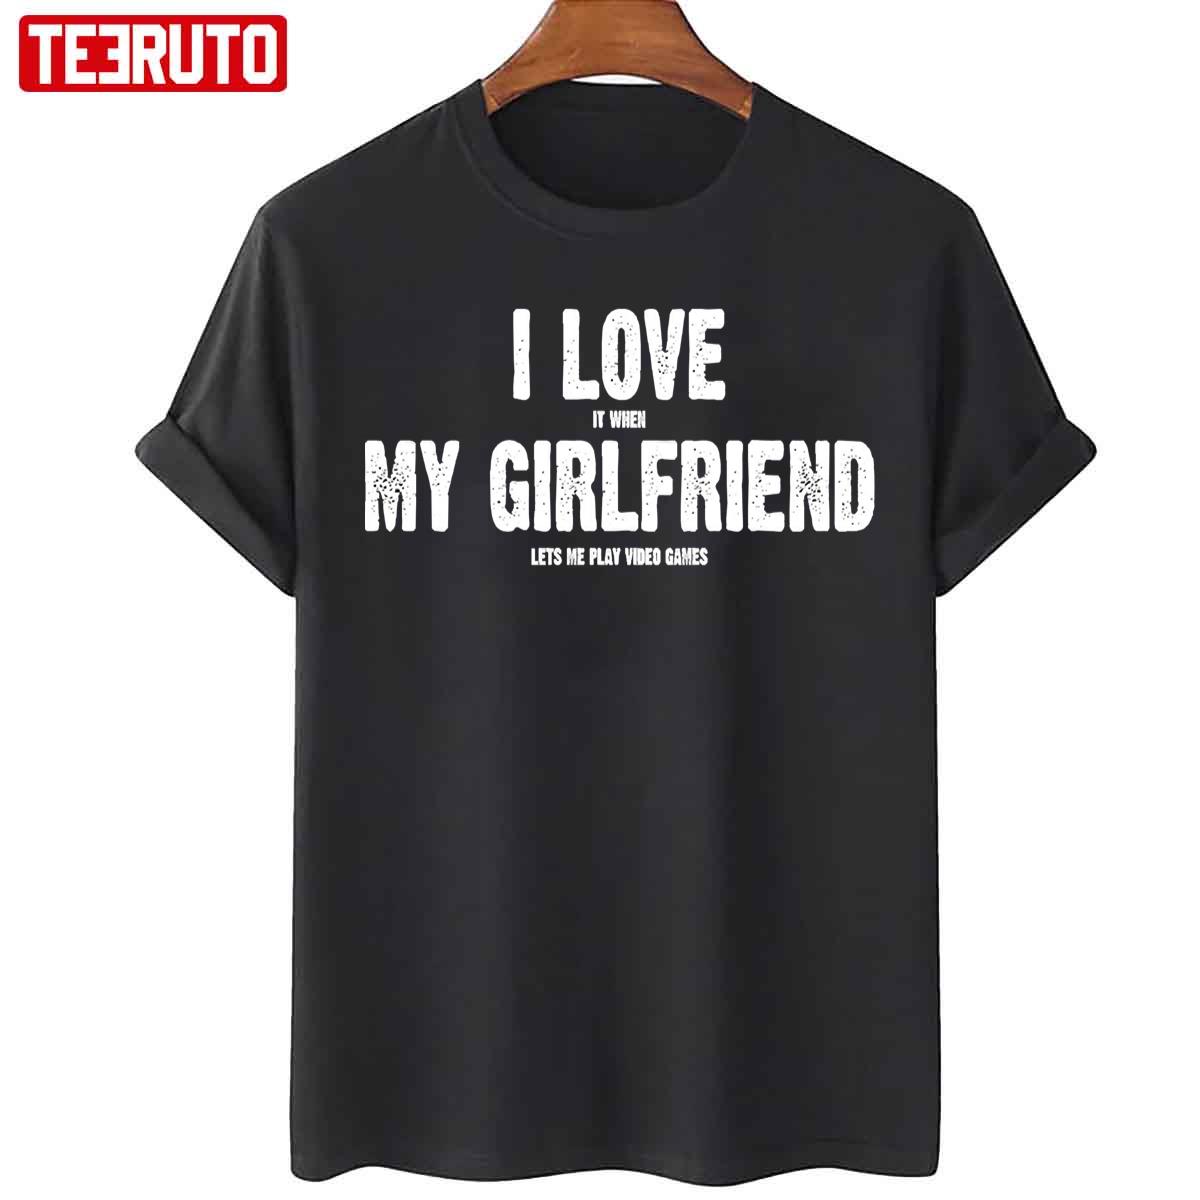 I Love It When My Girlfriend Lets Me Play Video Games Funny T-Shirt -  Teeruto